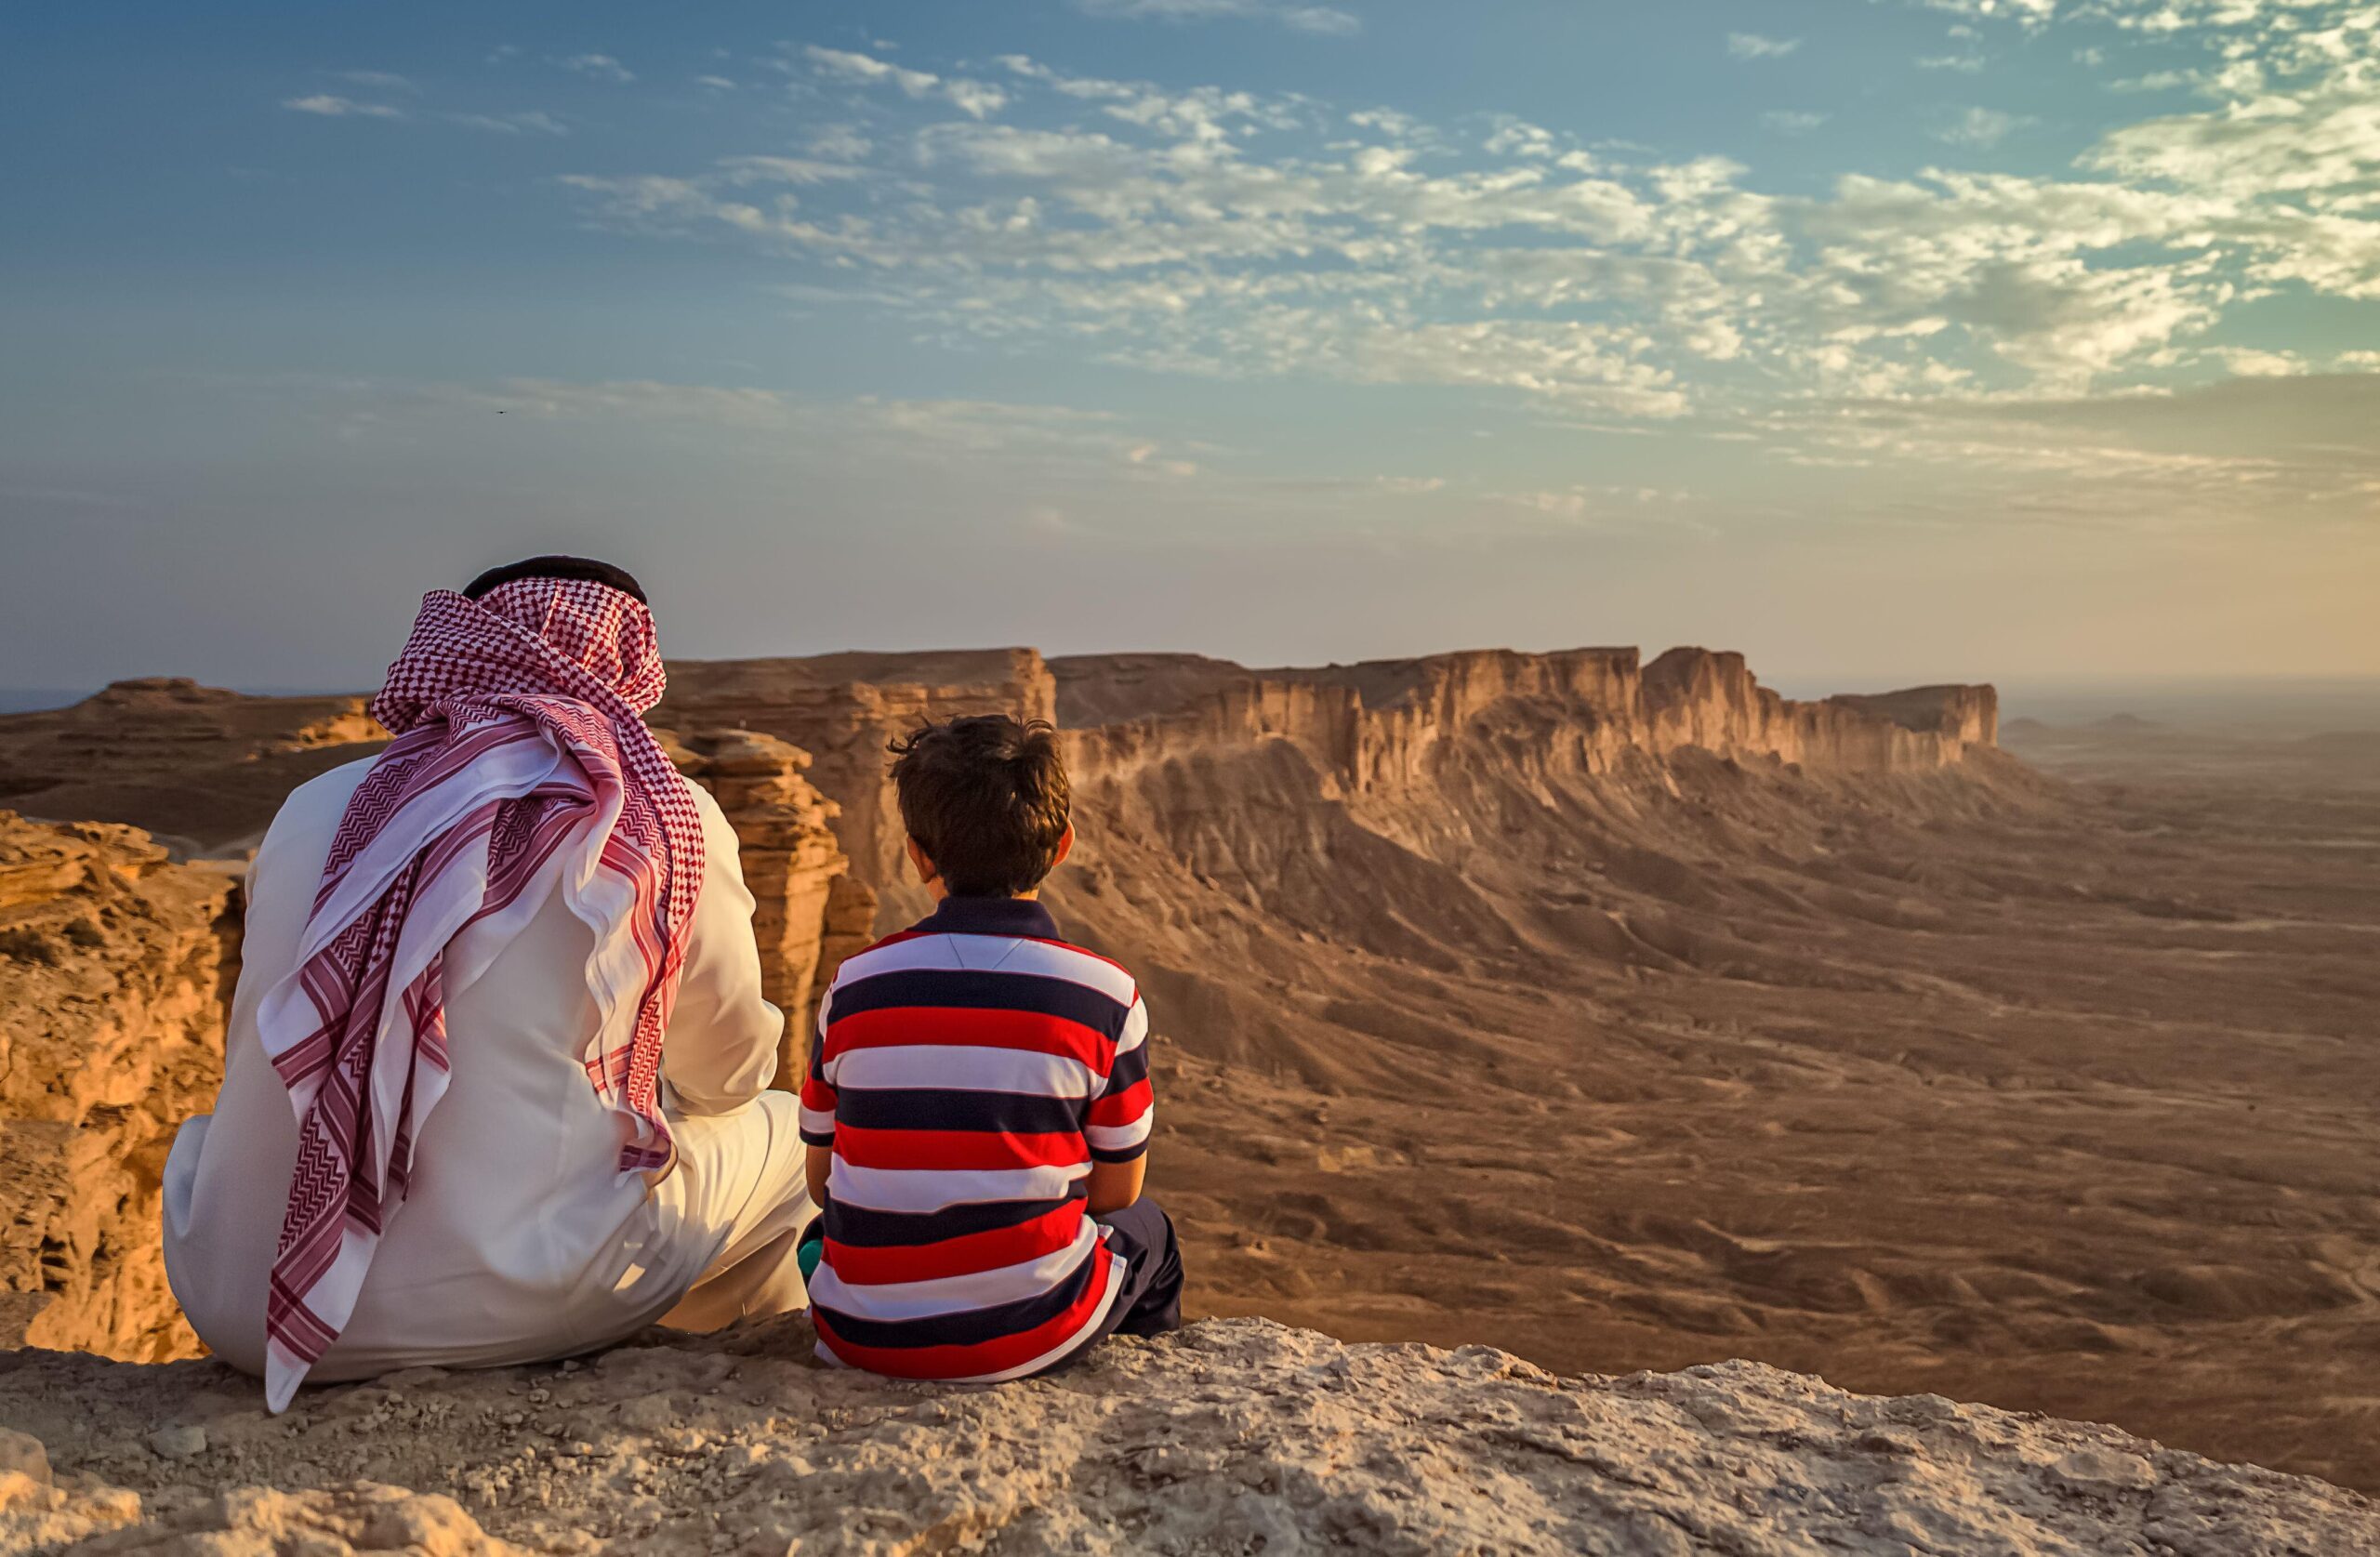 Visitors to the Edge of the World, a natural landmark and popular tourist destination near Riyadh. Interacting with local people is important, says the tourism minister